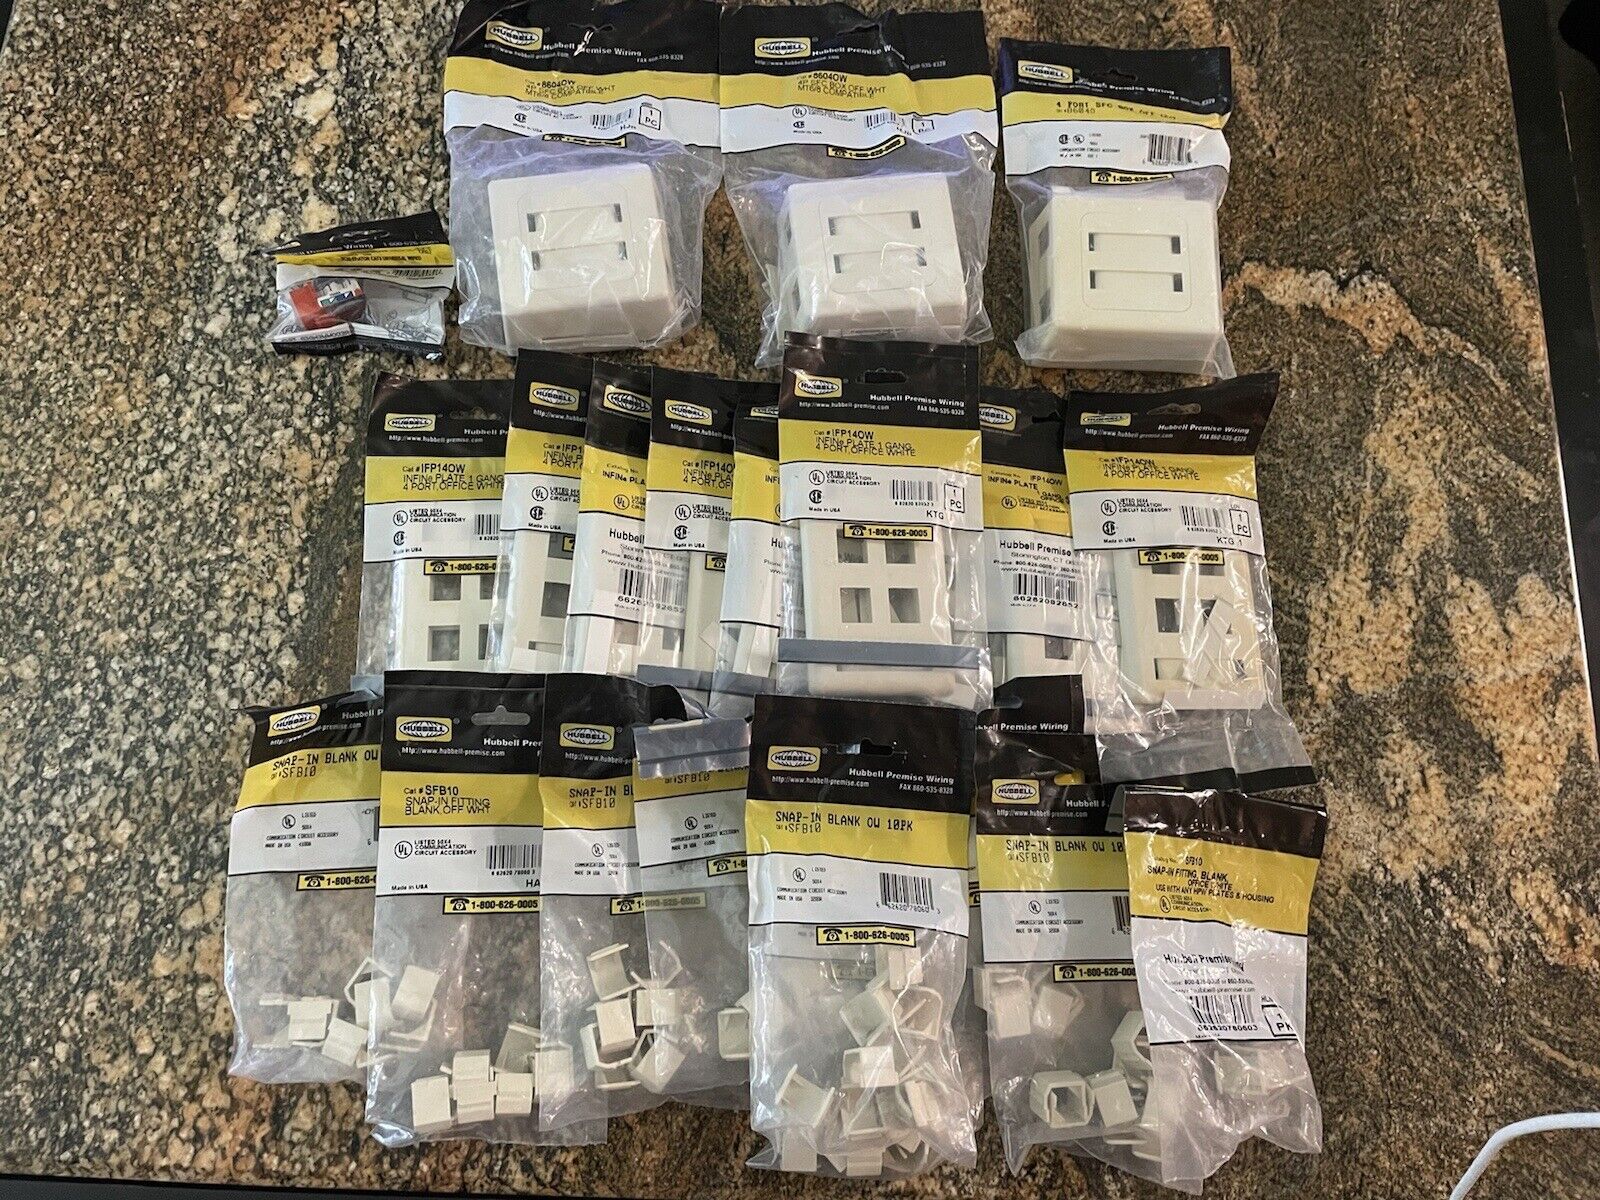 Huge Lot- Hubbell Premise Wiring Wall Plate IFP14OW Snap SFB10 Box 8604OW HXJ3OR